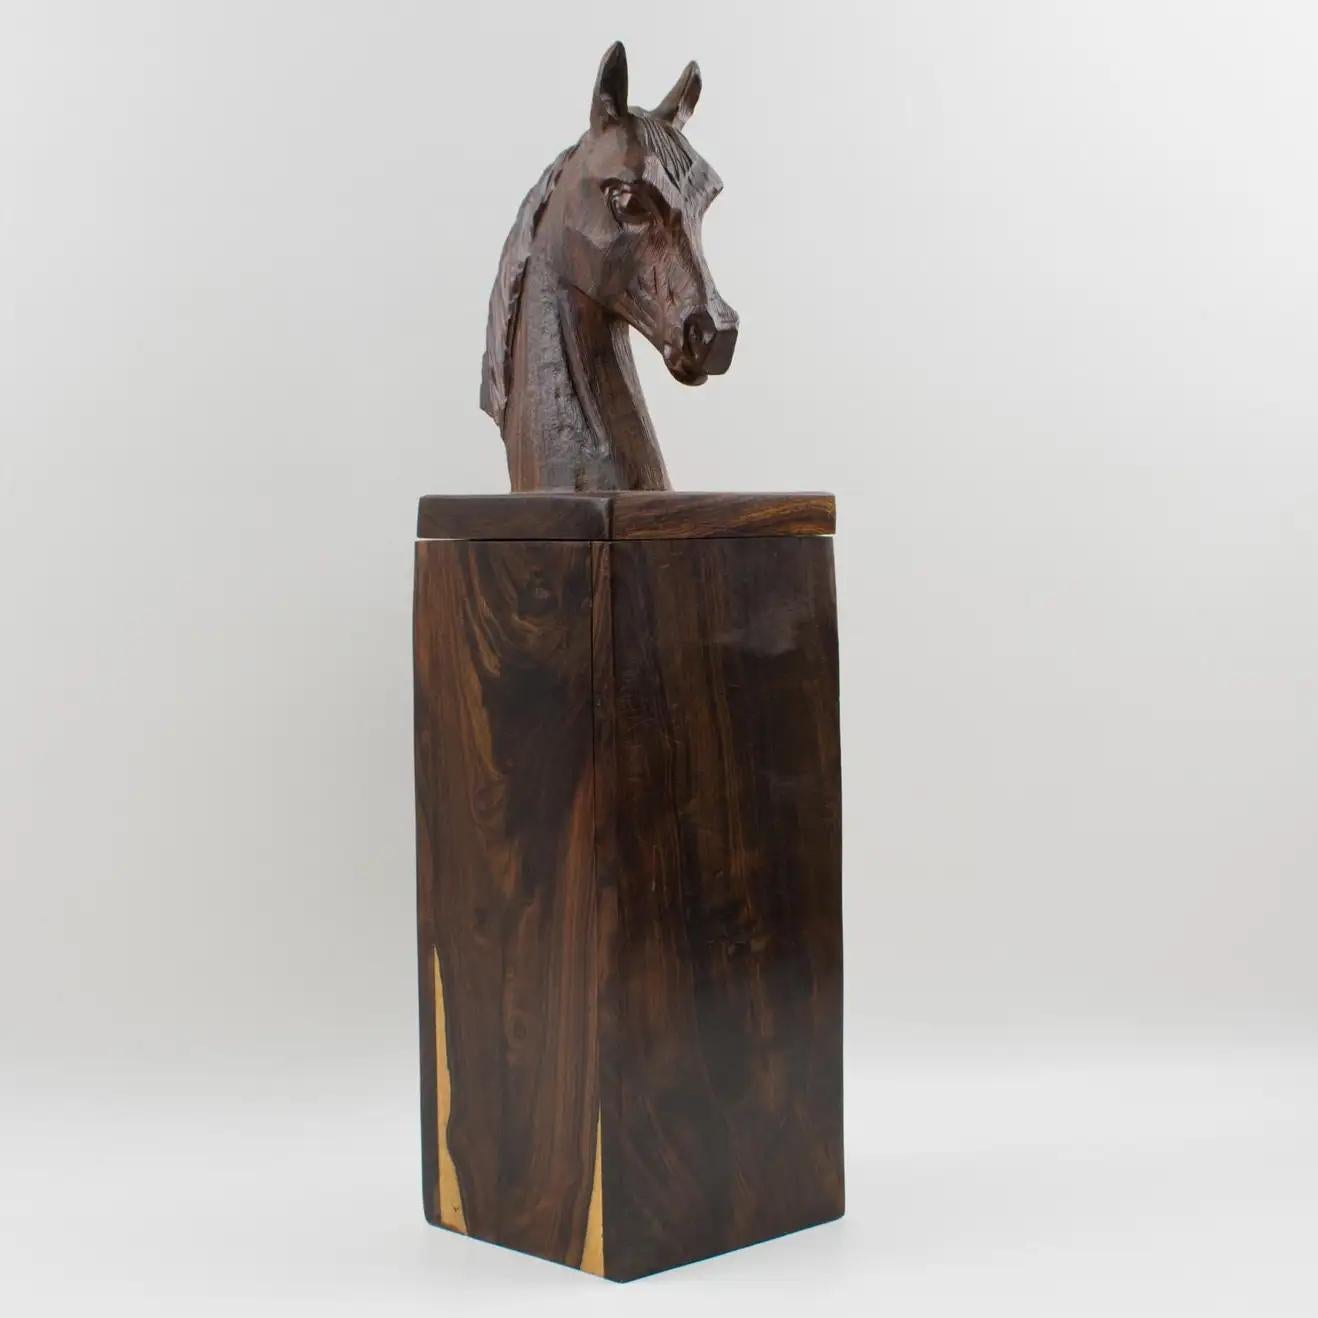 This extra tall decorative lidded box has an incredible hand-carved horse head on the top. The piece features an all-height square shape, made in Macassar wood, handmade and hand-carved. The massive figurative horse head on the top of the lid can be